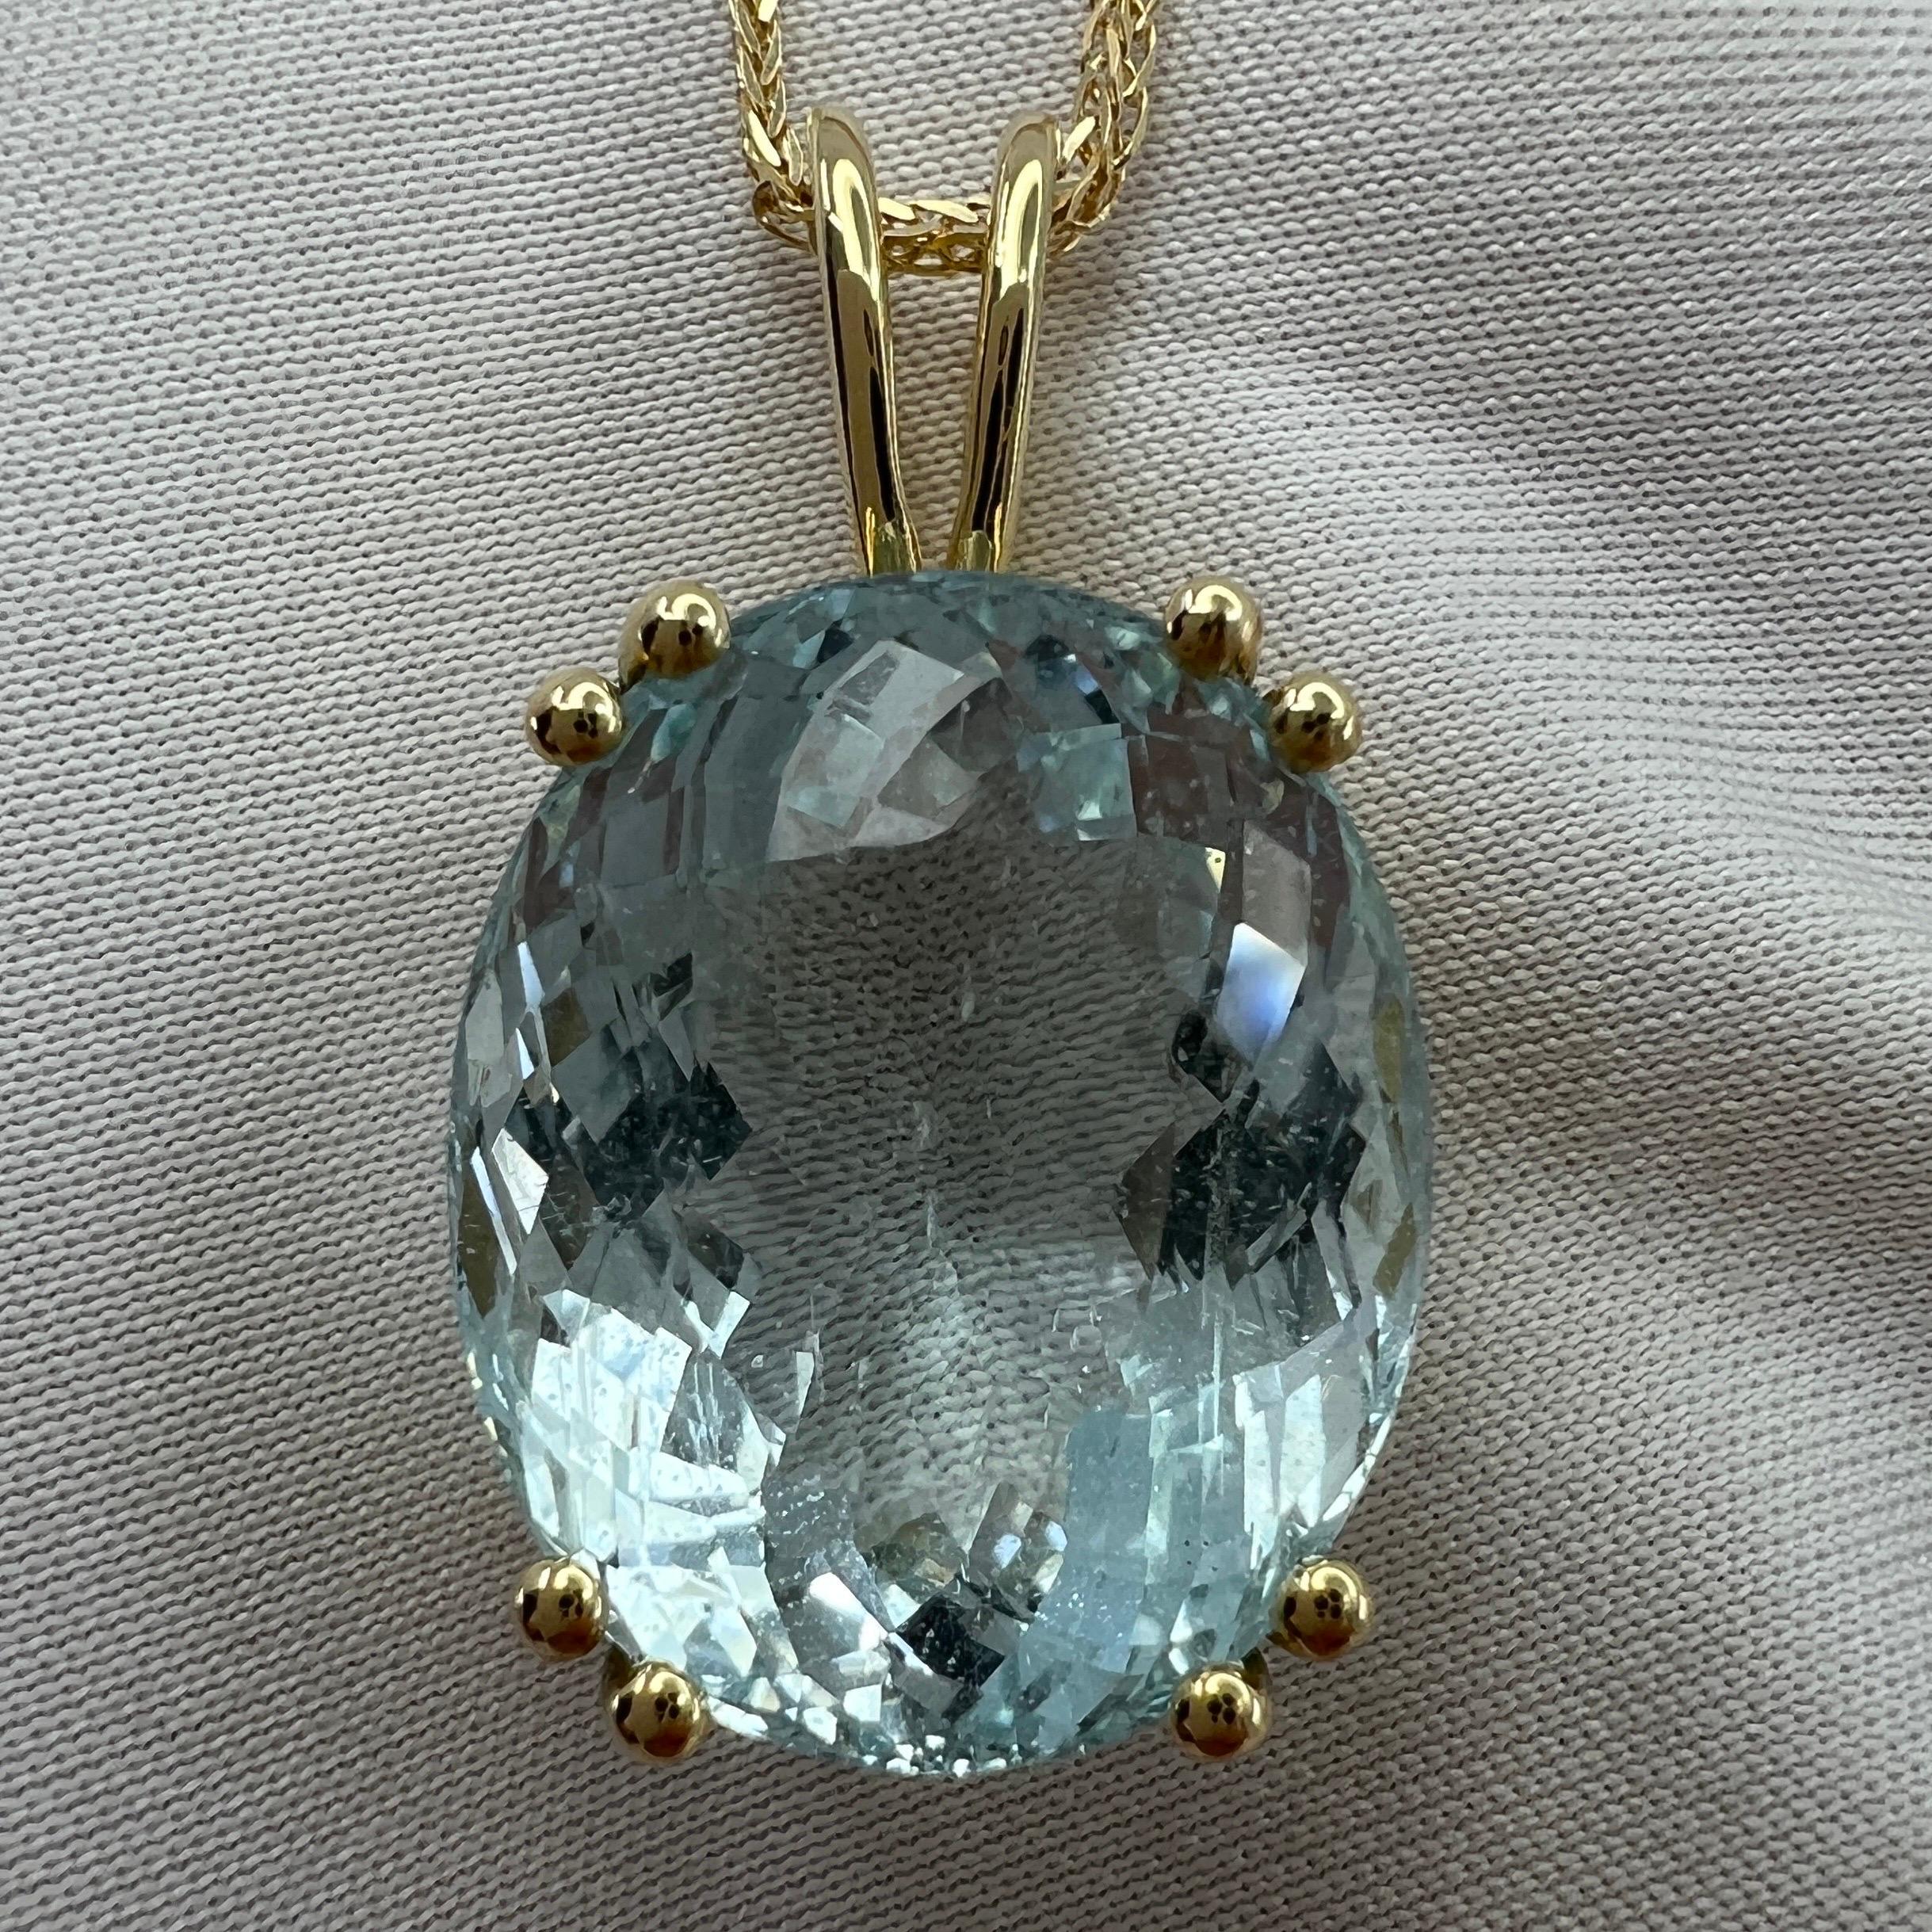 Fine Natural Blue Aquamarine Pendant Necklace.

Large 17.68 carat aquamarine with a stunning bright blue colour set in a fine 18k yellow gold solitaire pendant.
The aquamarine has an excellent fancy oval cut showing lots of brightness and light